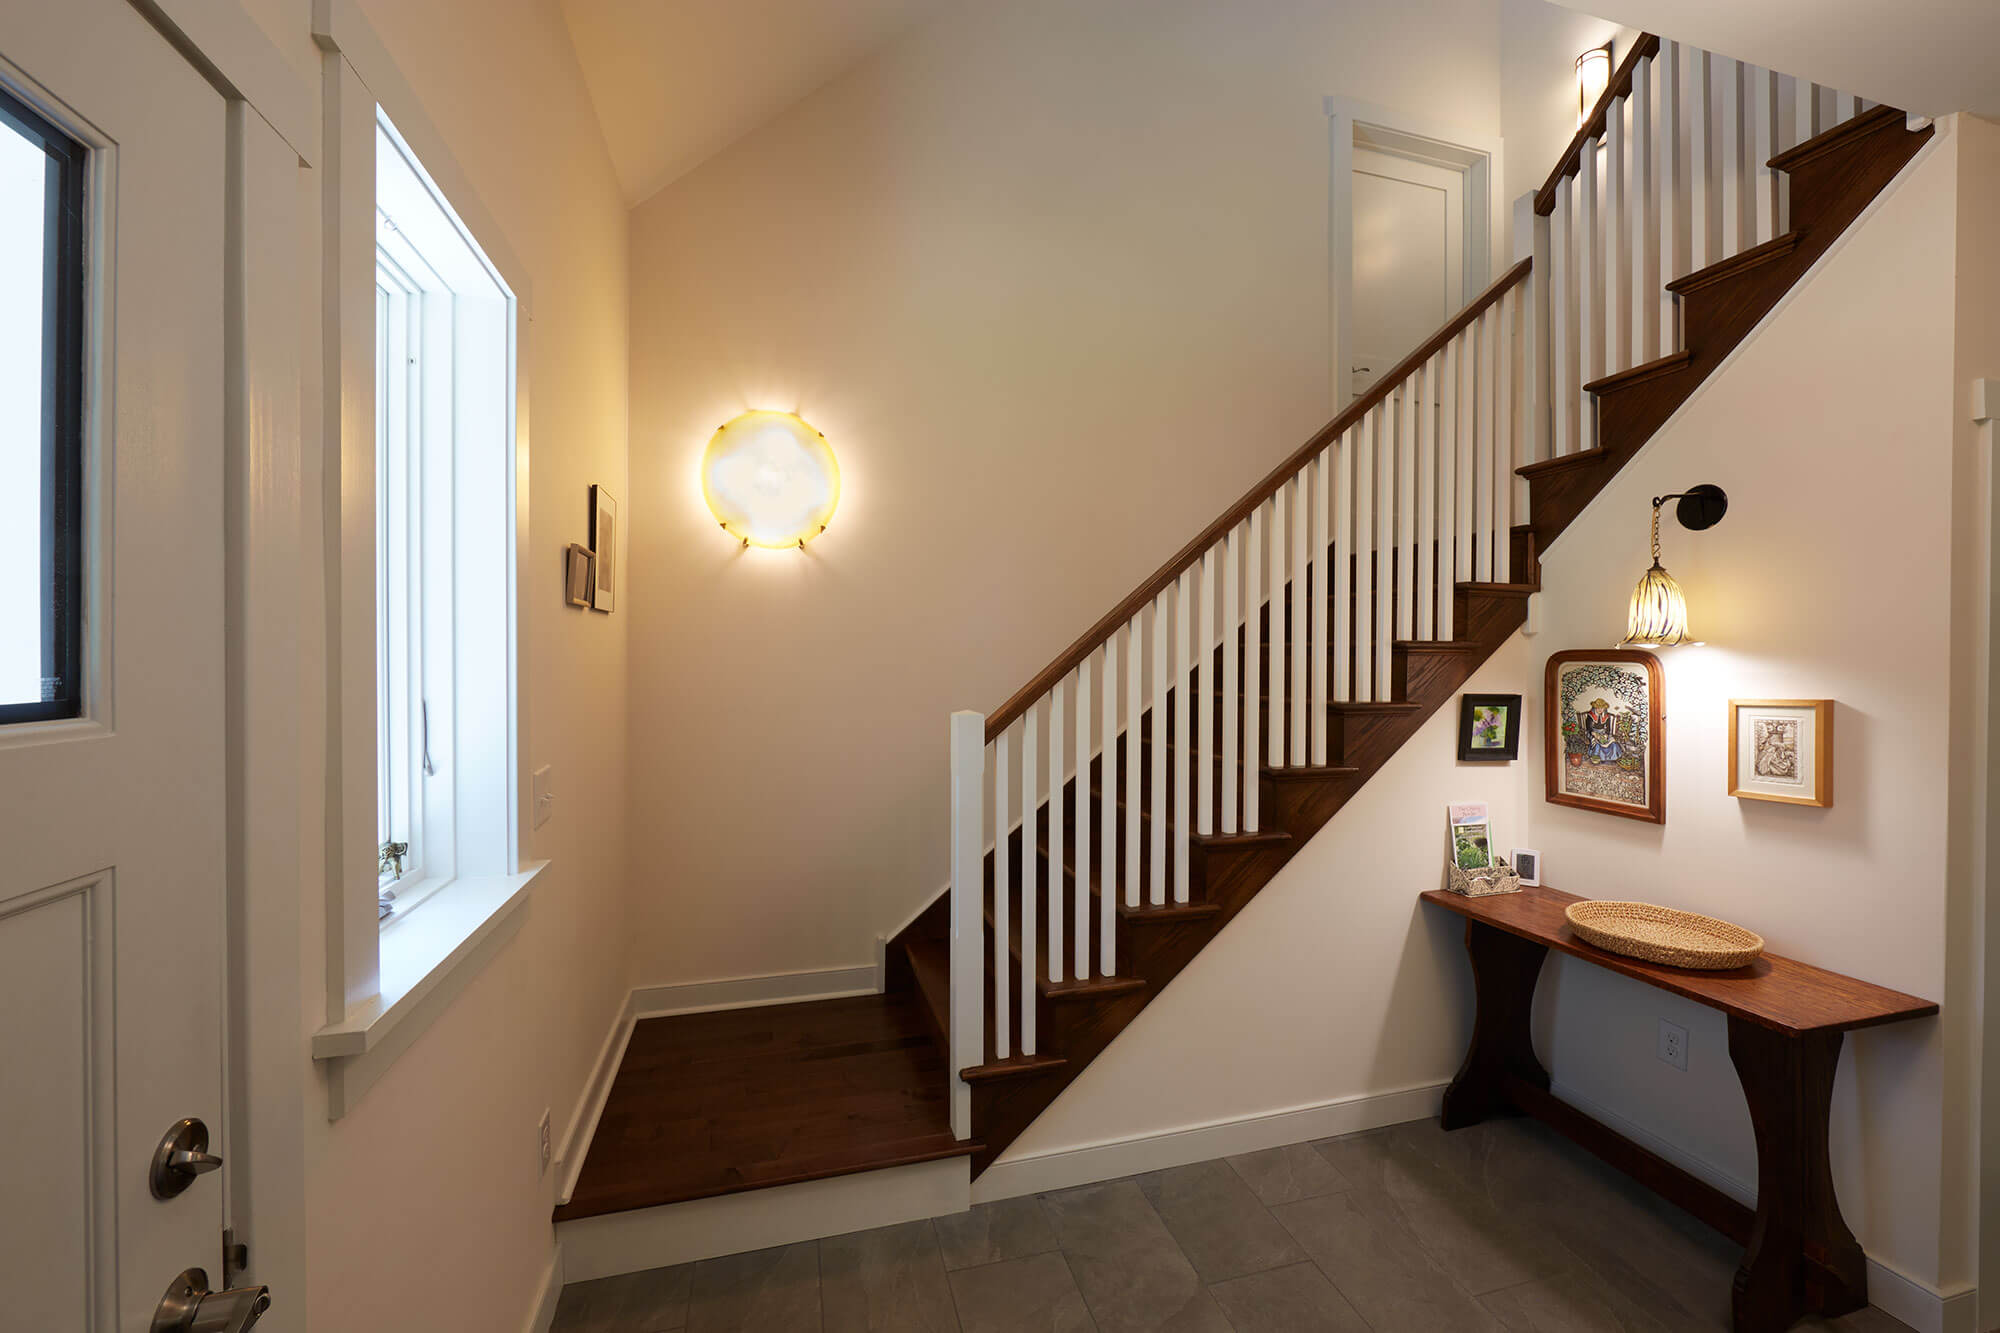 Delaware County Residential Remodel Architecture Services